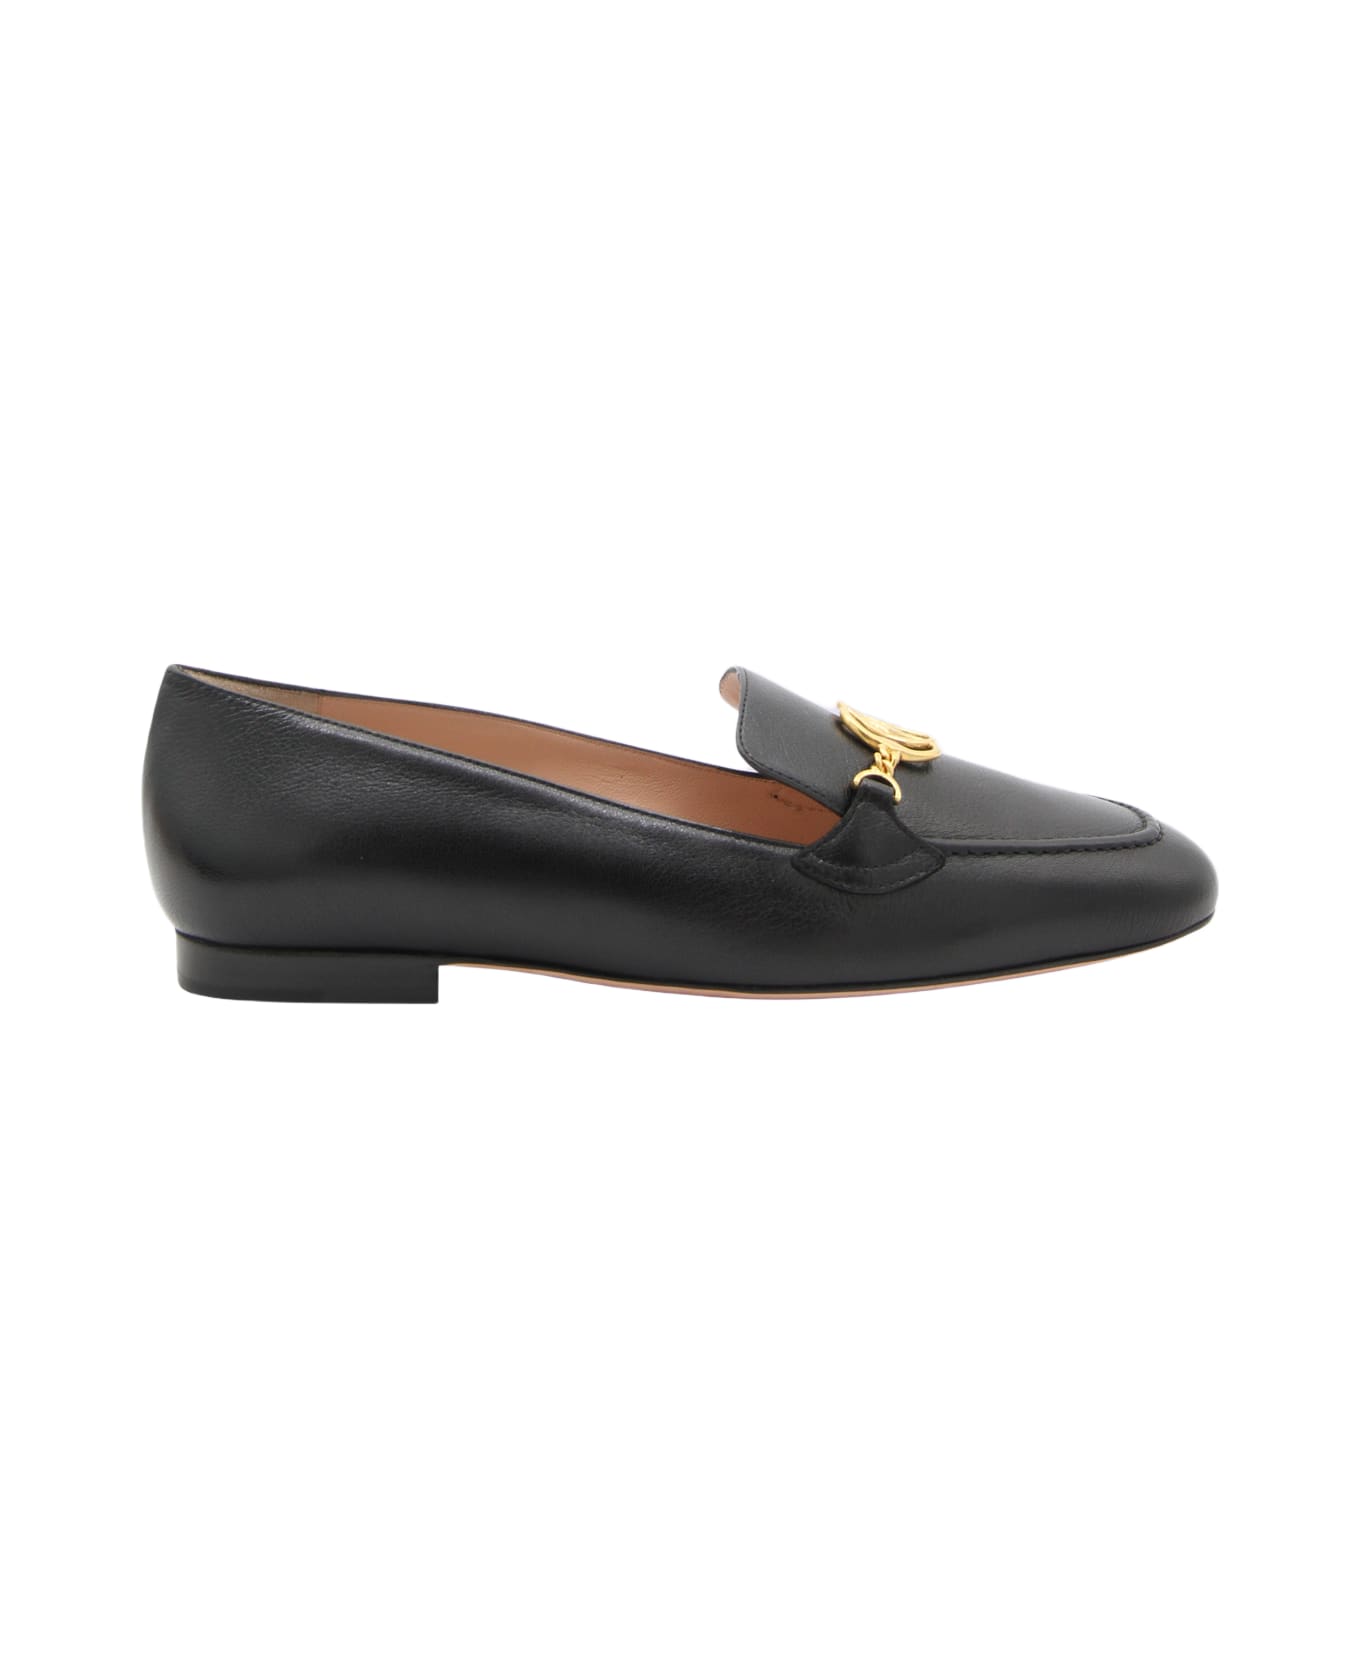 Bally Black Leather Obrien Loafers - Black